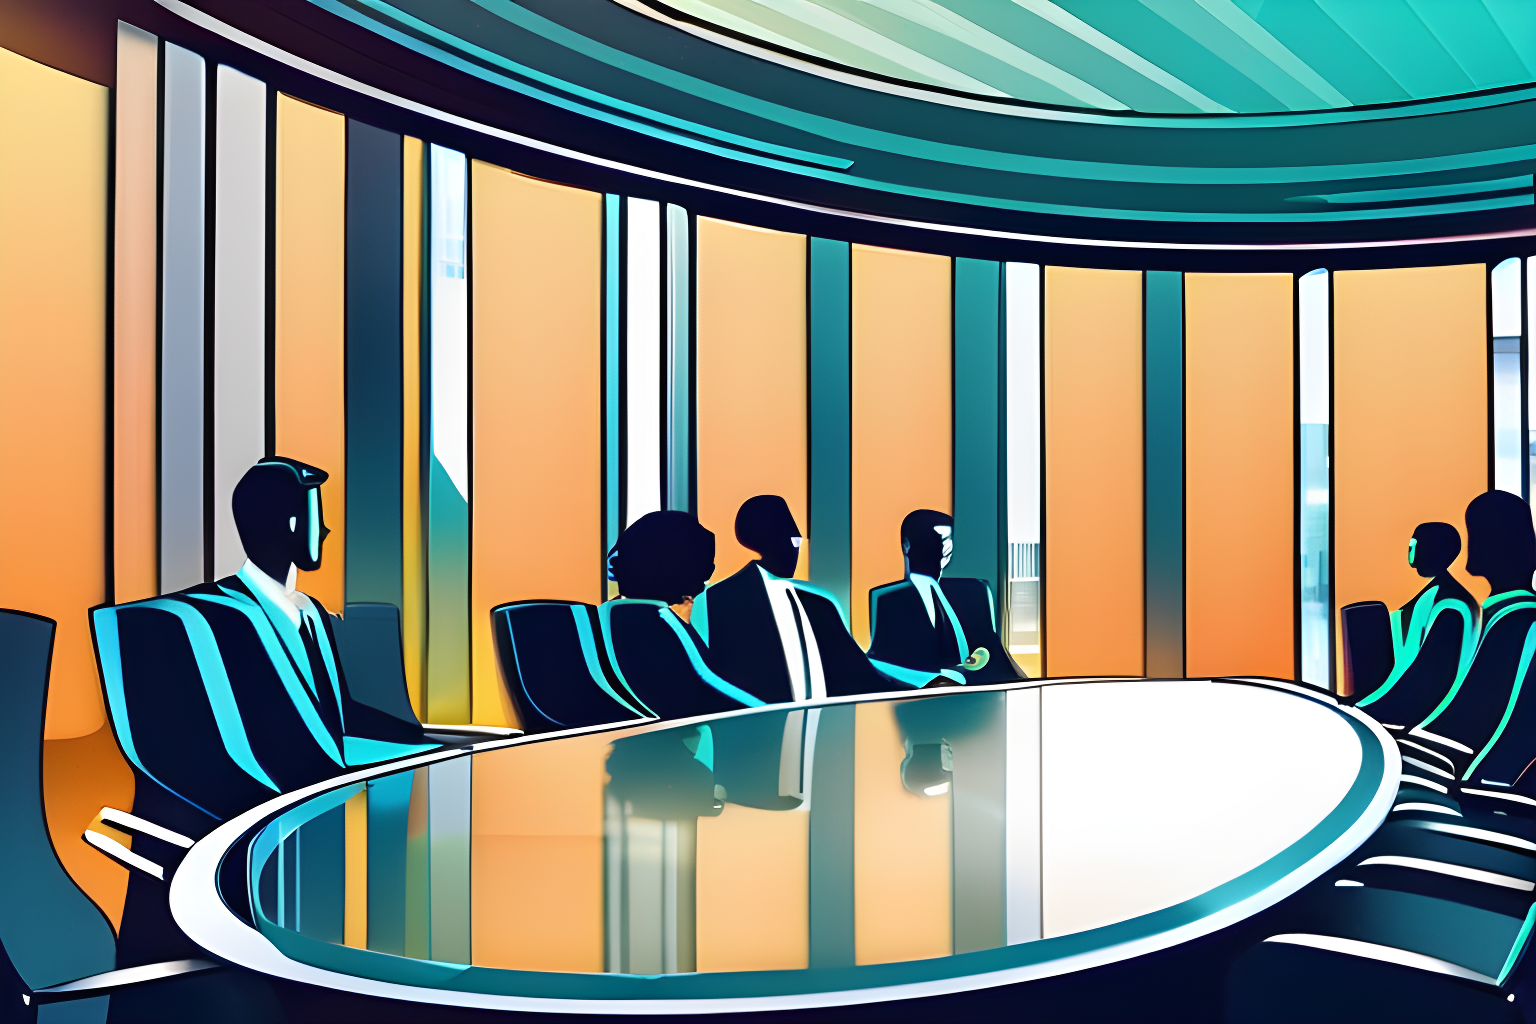 Illustrate a futuristic boardroom where humans and holograms are conversing